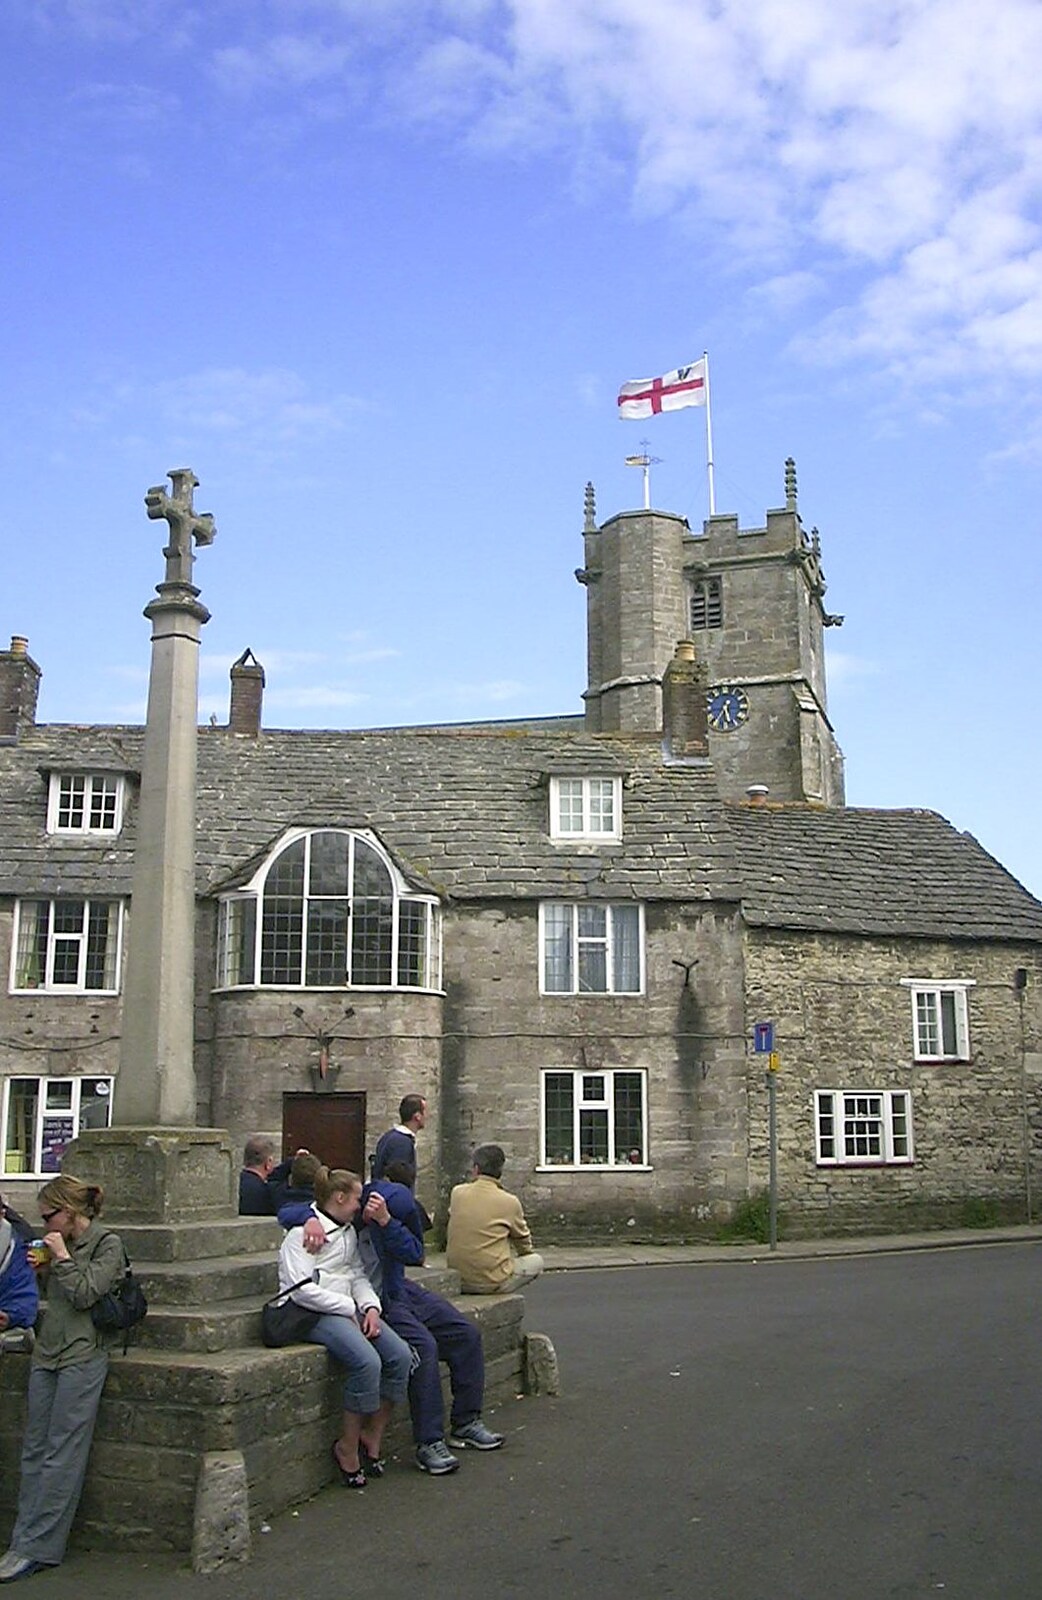 Corfe Castle Camping, Corfe, Dorset - 30th May 2004: The church in Corfe flies the flag of St. George